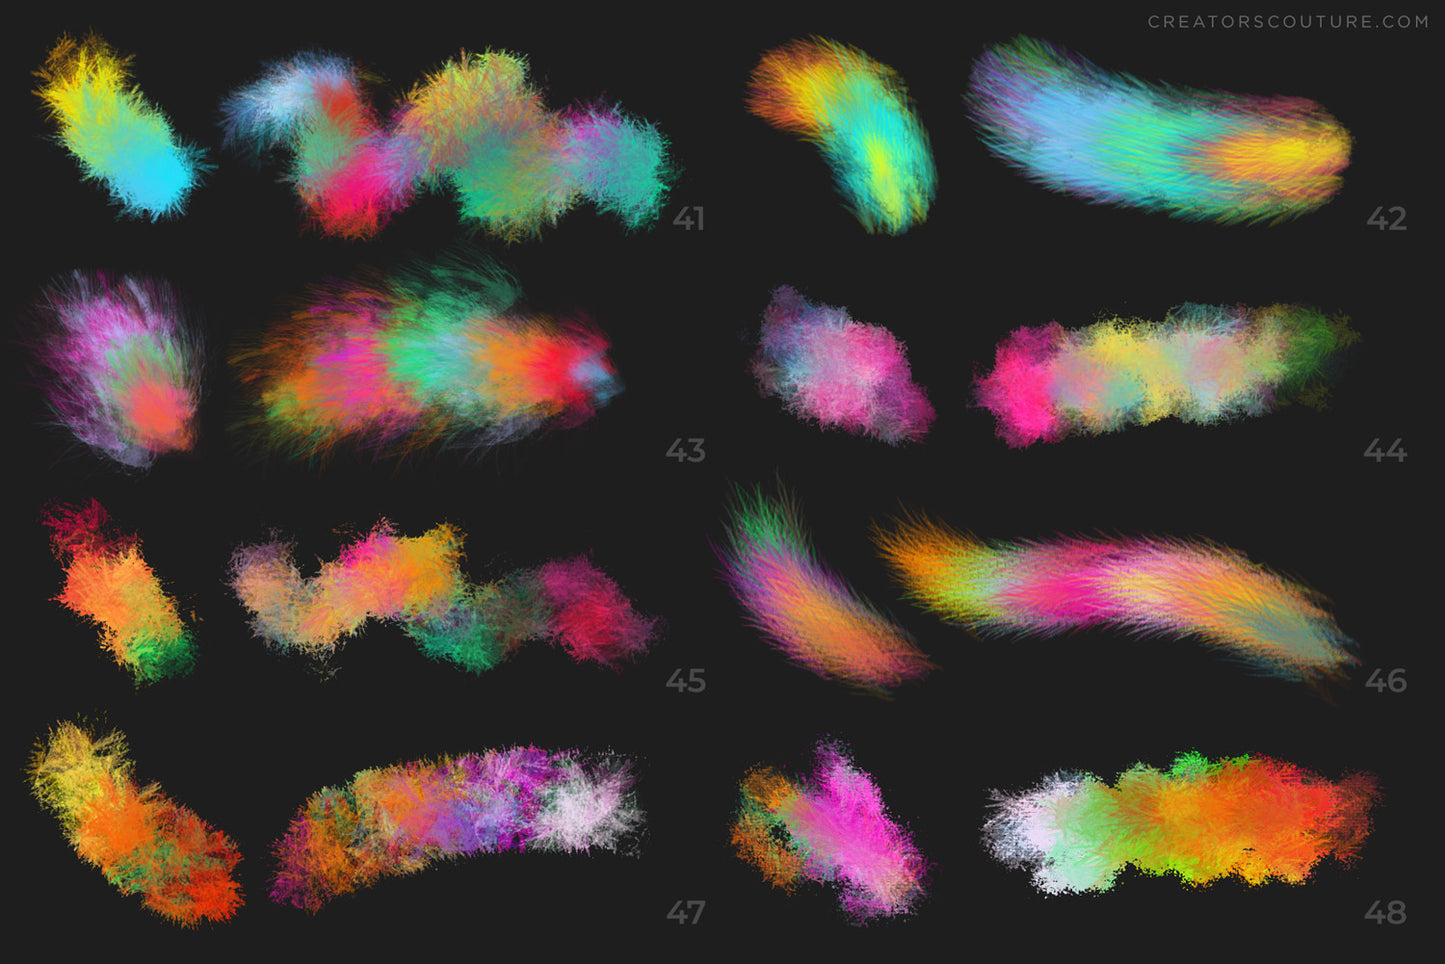 55 Painterly Artistic Photoshop Digital Brushes "Feather Couture Fantasies"